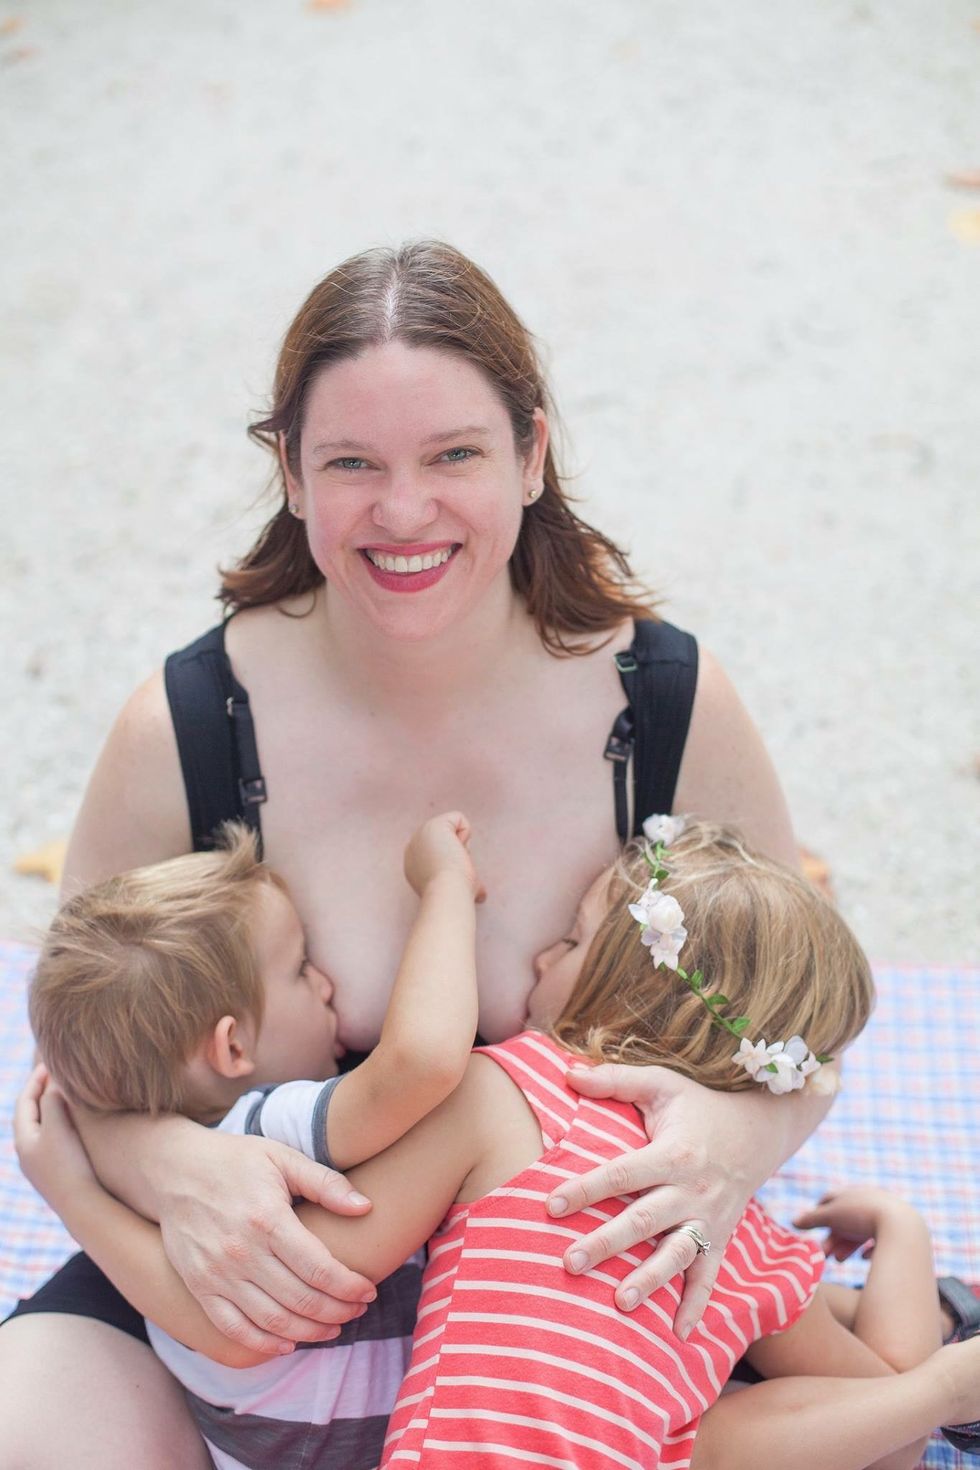 I'm a mom who breastfed two kids with real boobs - my $40 tank top